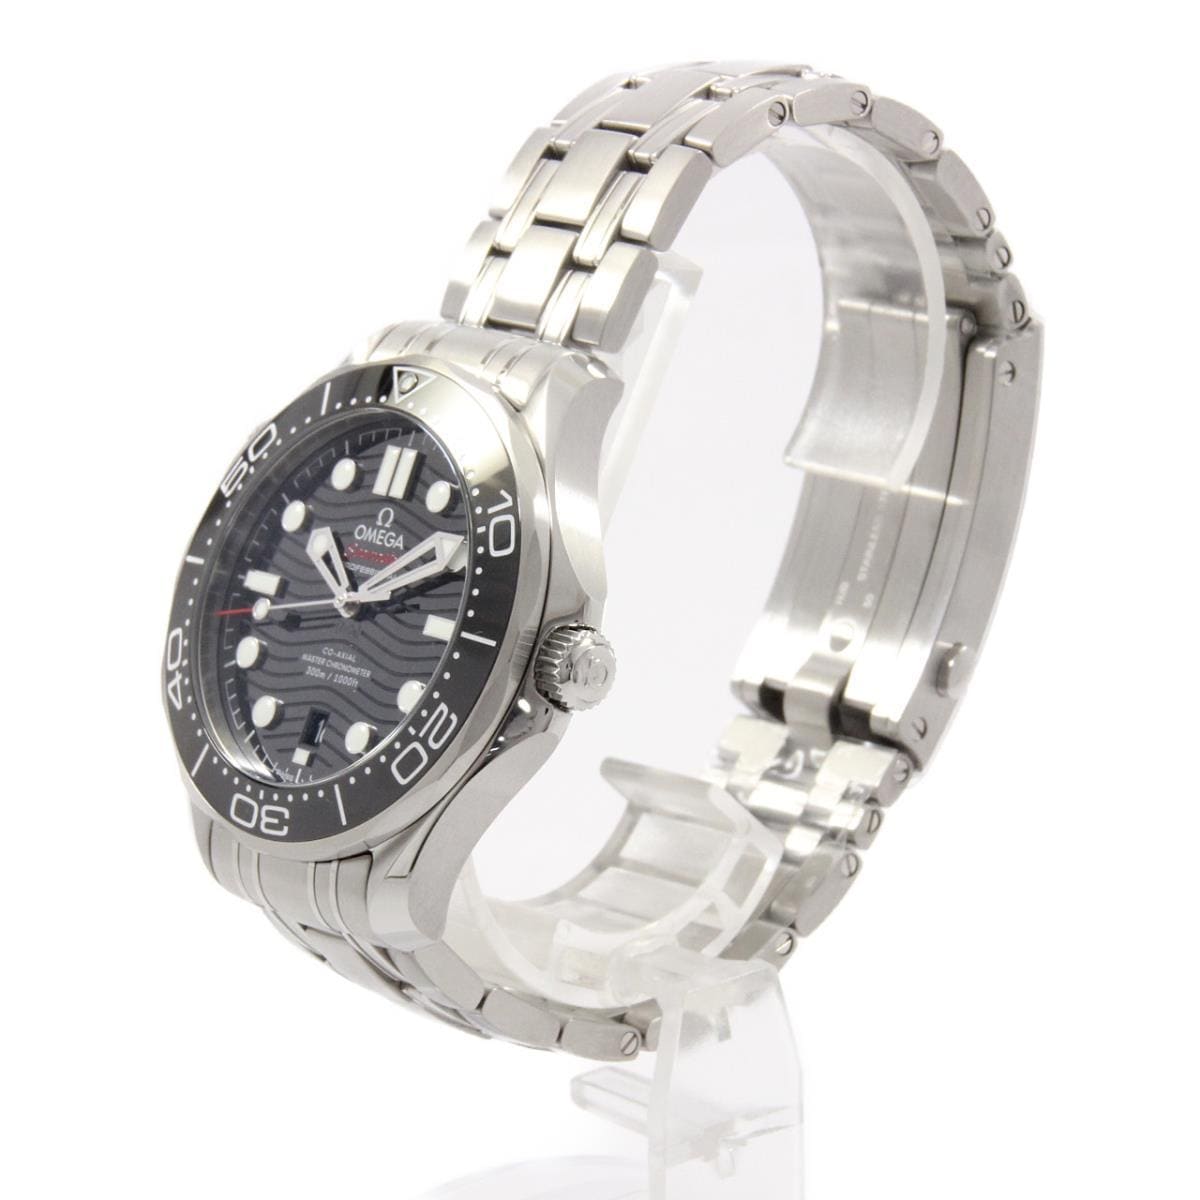 [BRAND NEW] Omega 210.30.42.20.01.001 Seamaster Diver 300M Automatic